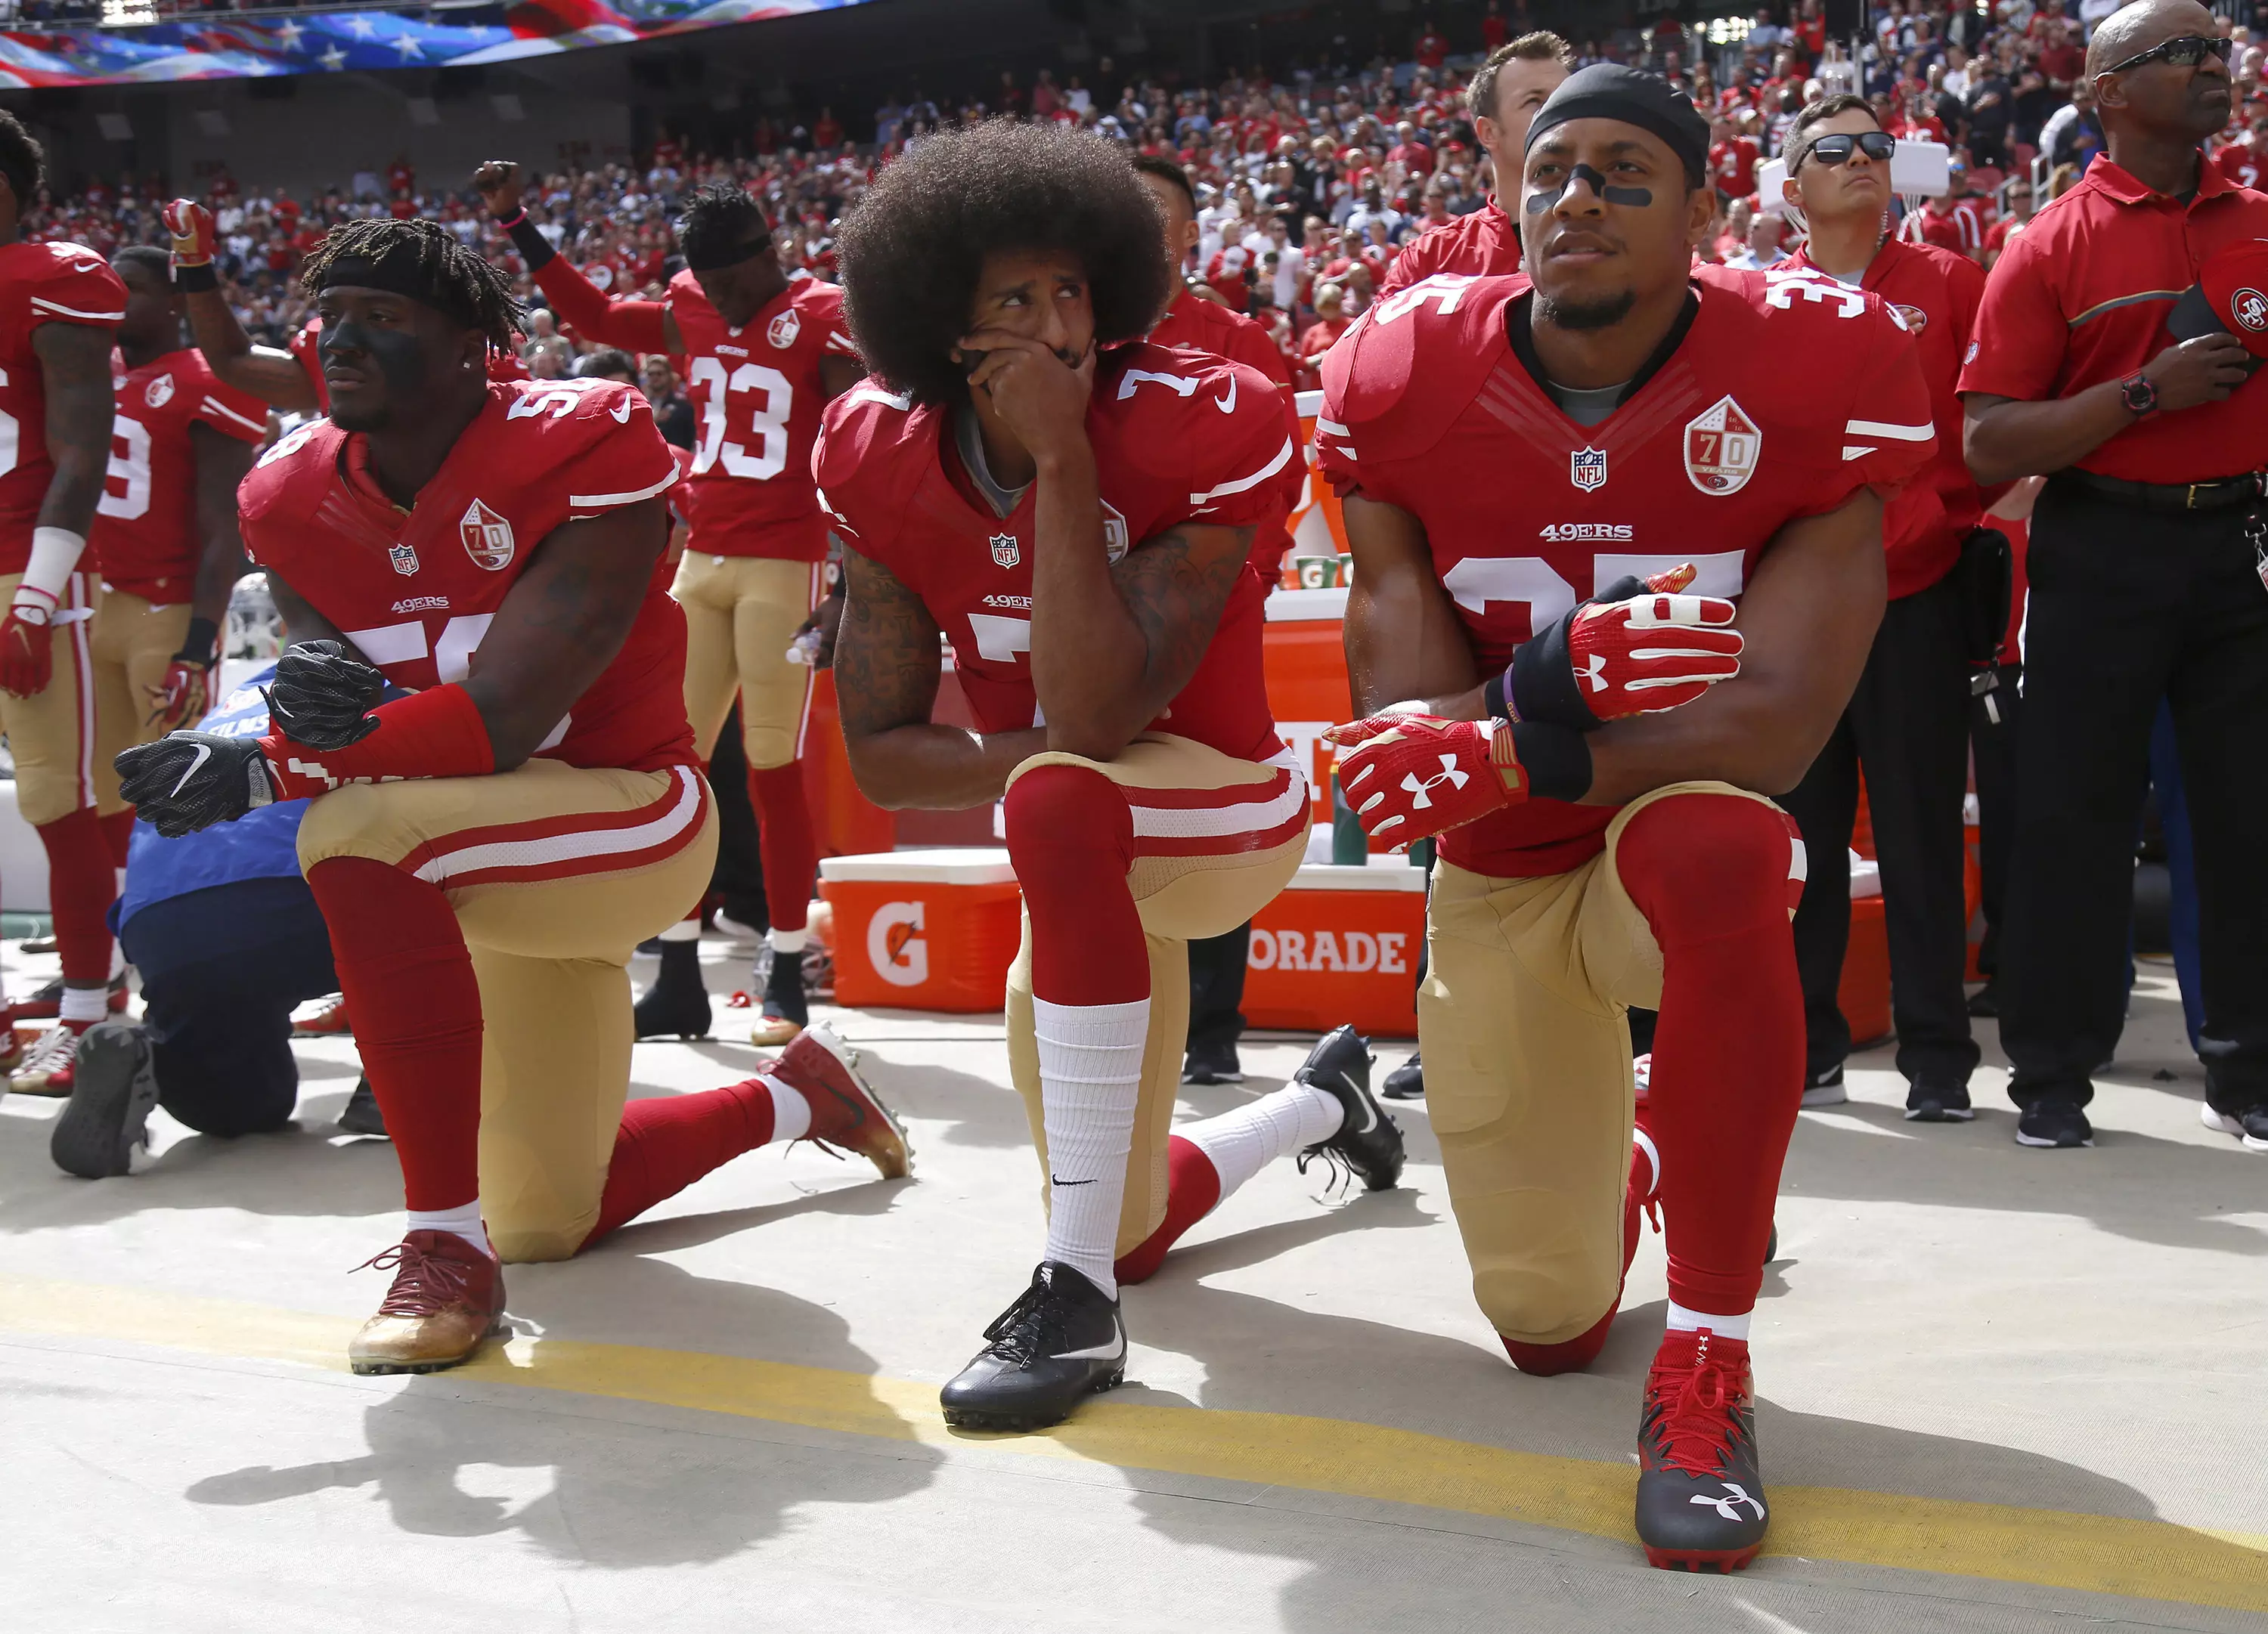 Colin Kaepernick and his teammates kneels in protest before an NFL game.